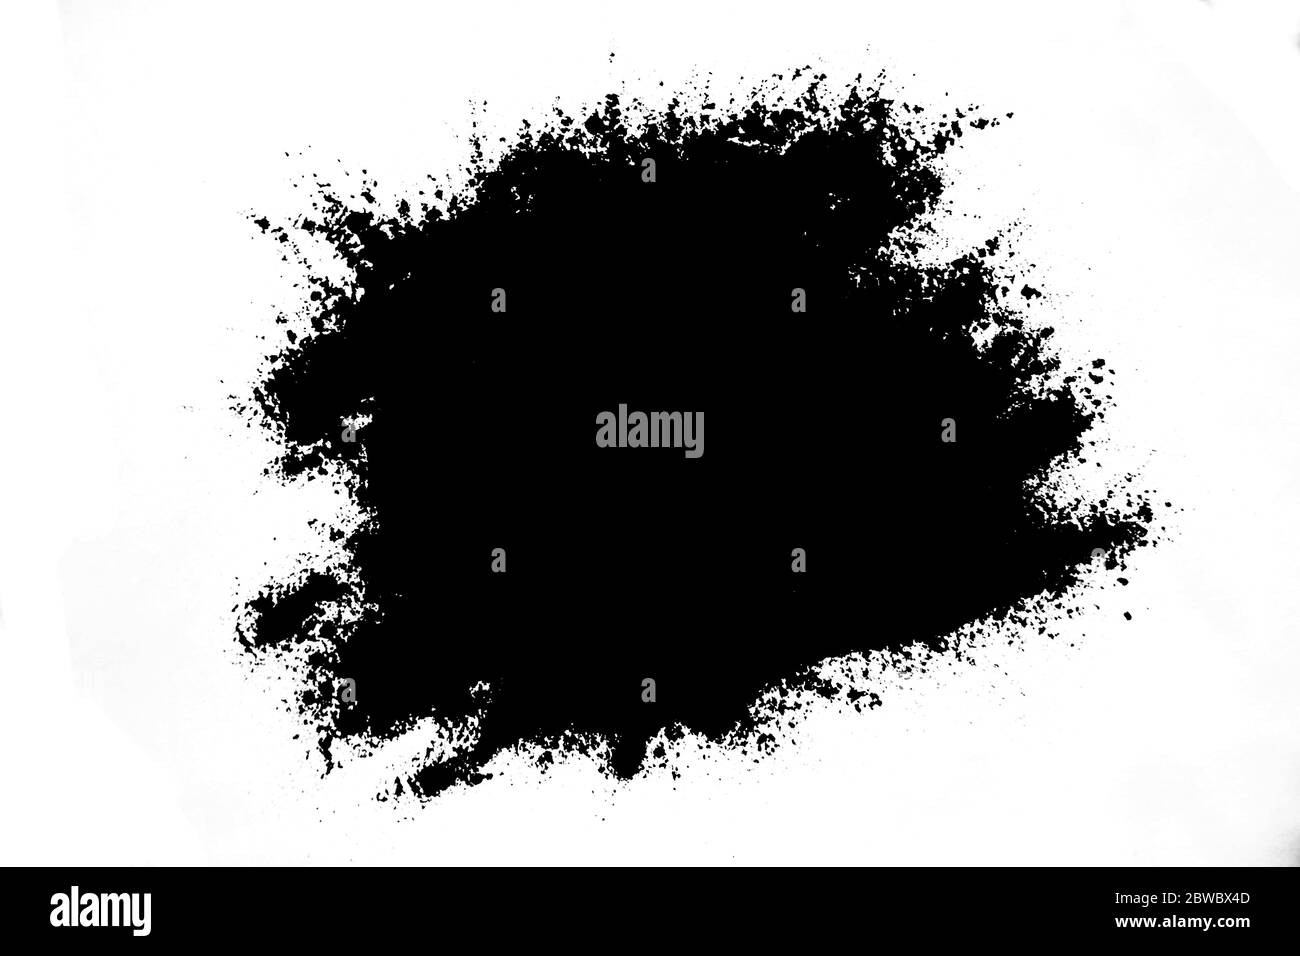 Design of a splash of black dry paint on a white background. Black mask  design for photoshop Stock Photo - Alamy